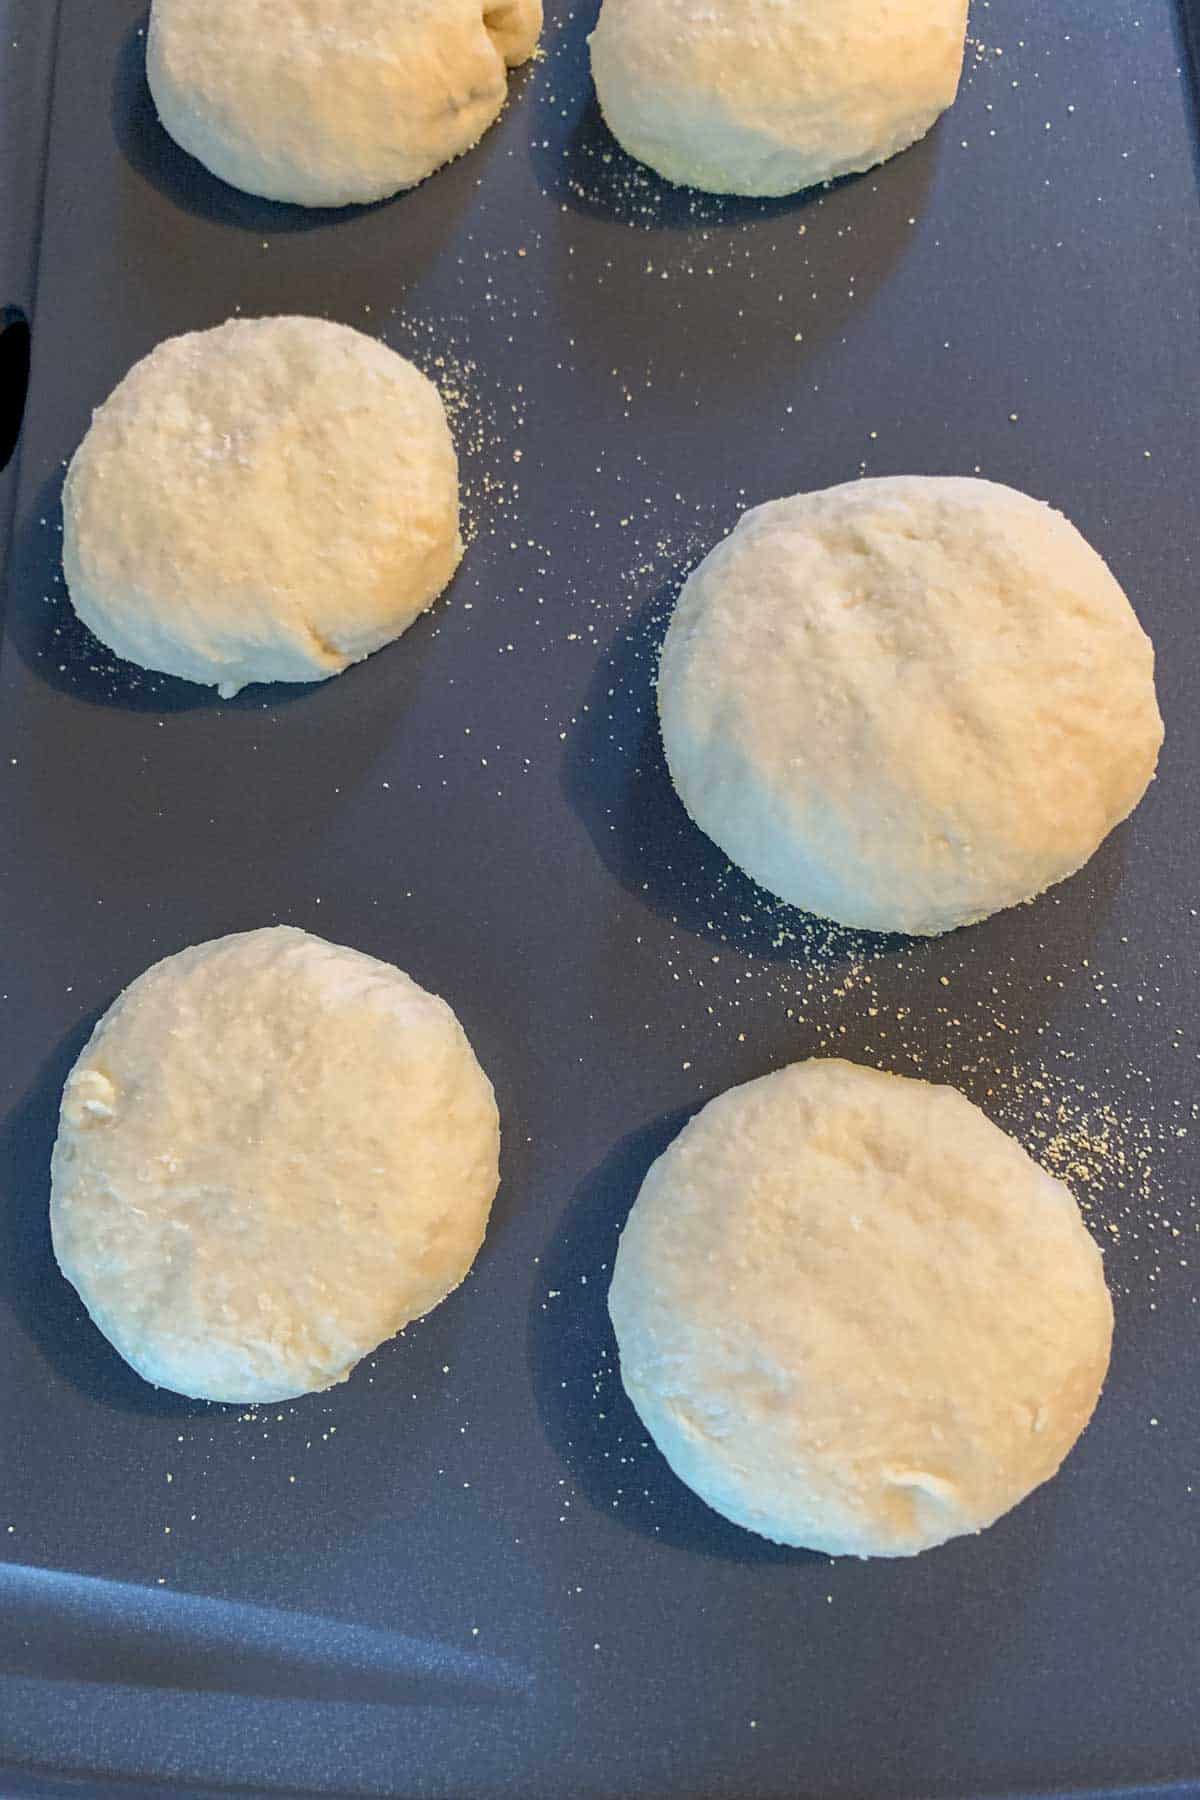 Unbaked English muffins on a griddle.